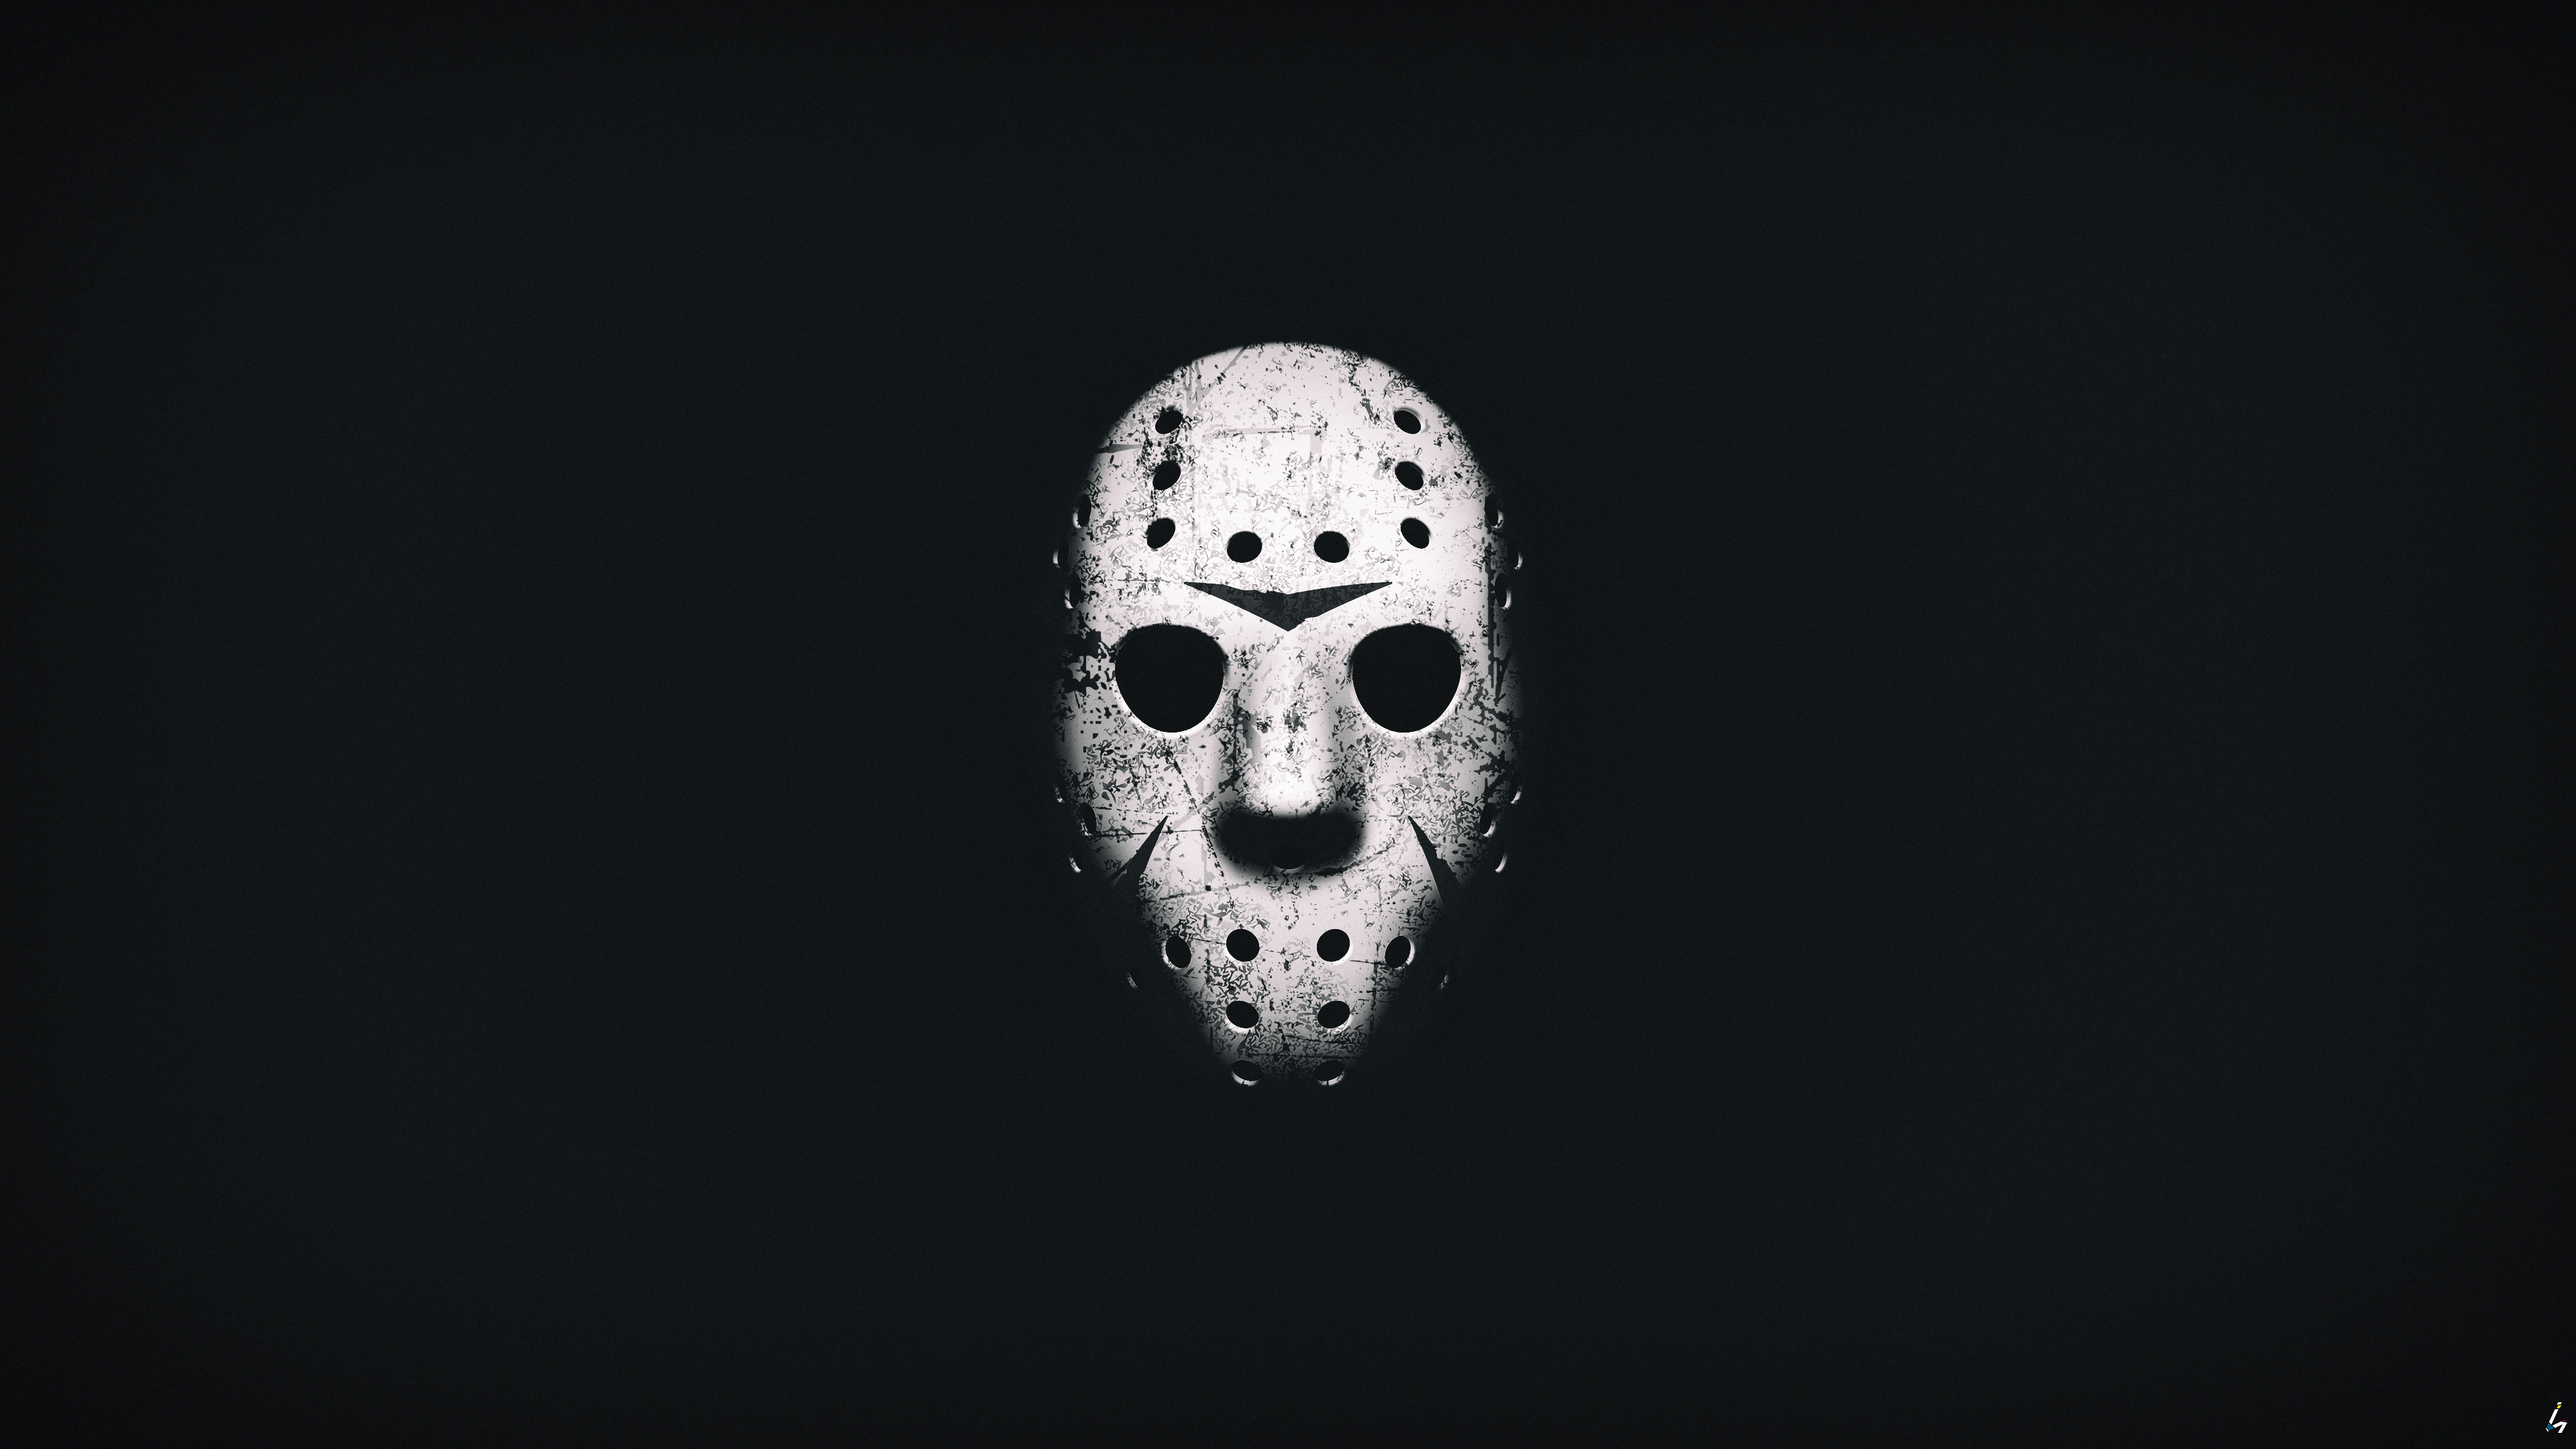 Game Art Mask Friday The 13th The Games Monochrome Low Saturation Hockey Mask Horror Horror Movies 3840x2160